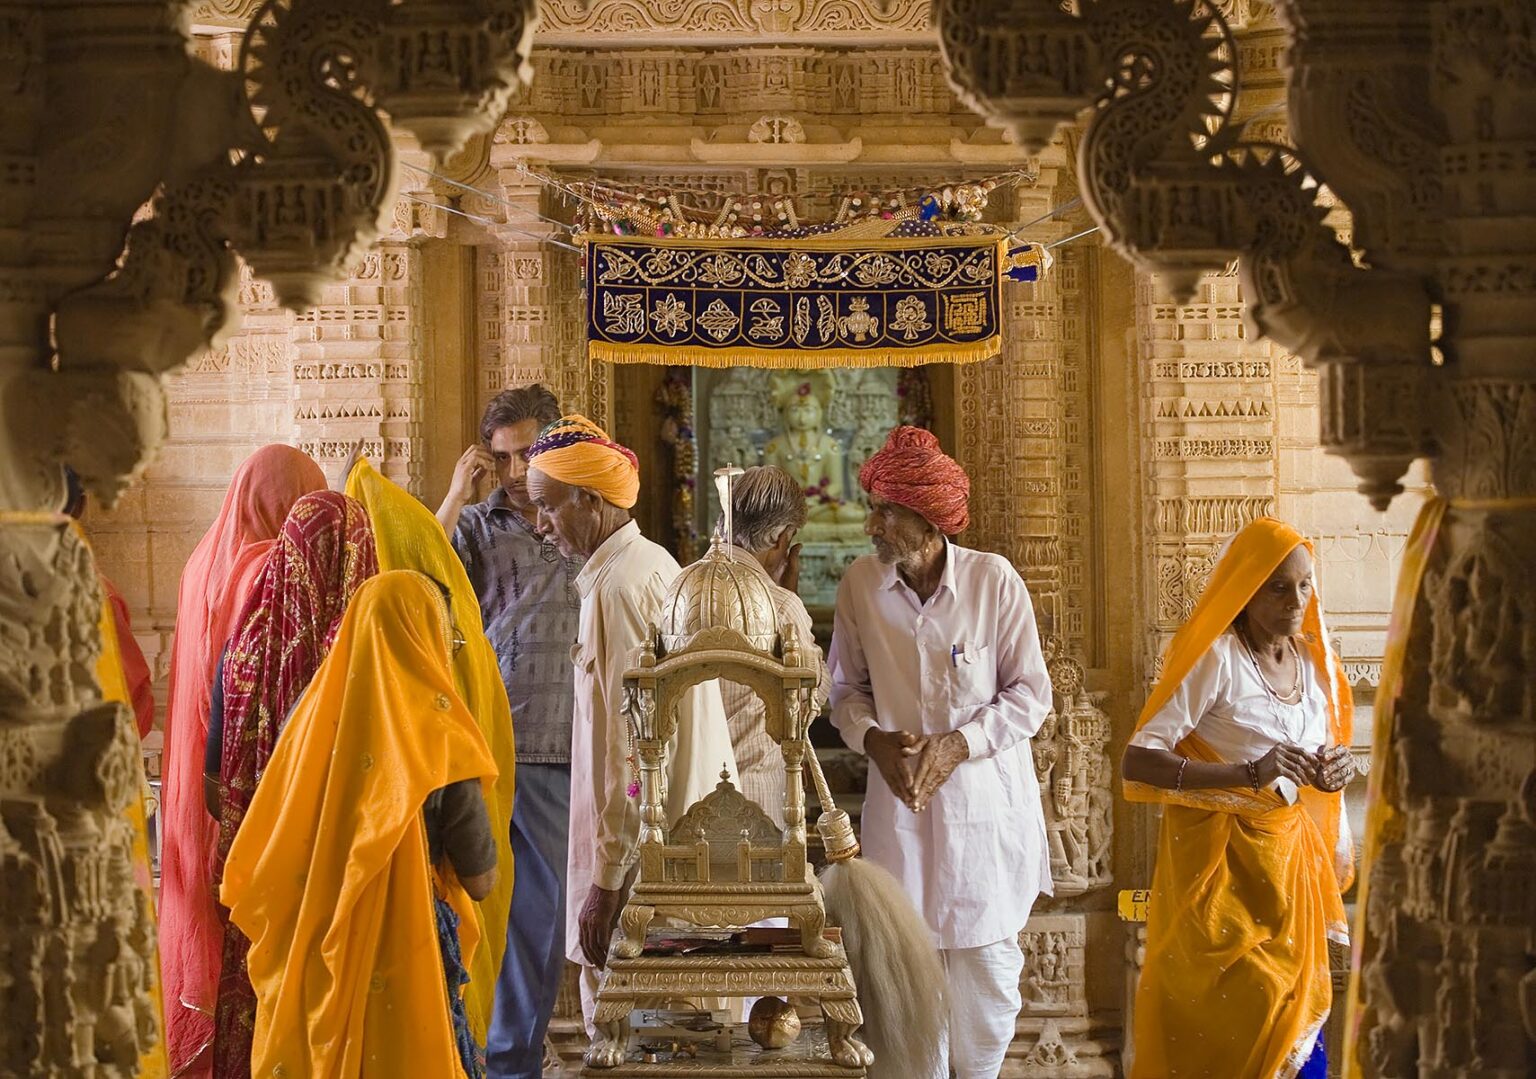 Indian pilgrims inside a JAIN TEMPLE in the JAISALMER FORT - RAJASTHAN, INDIA